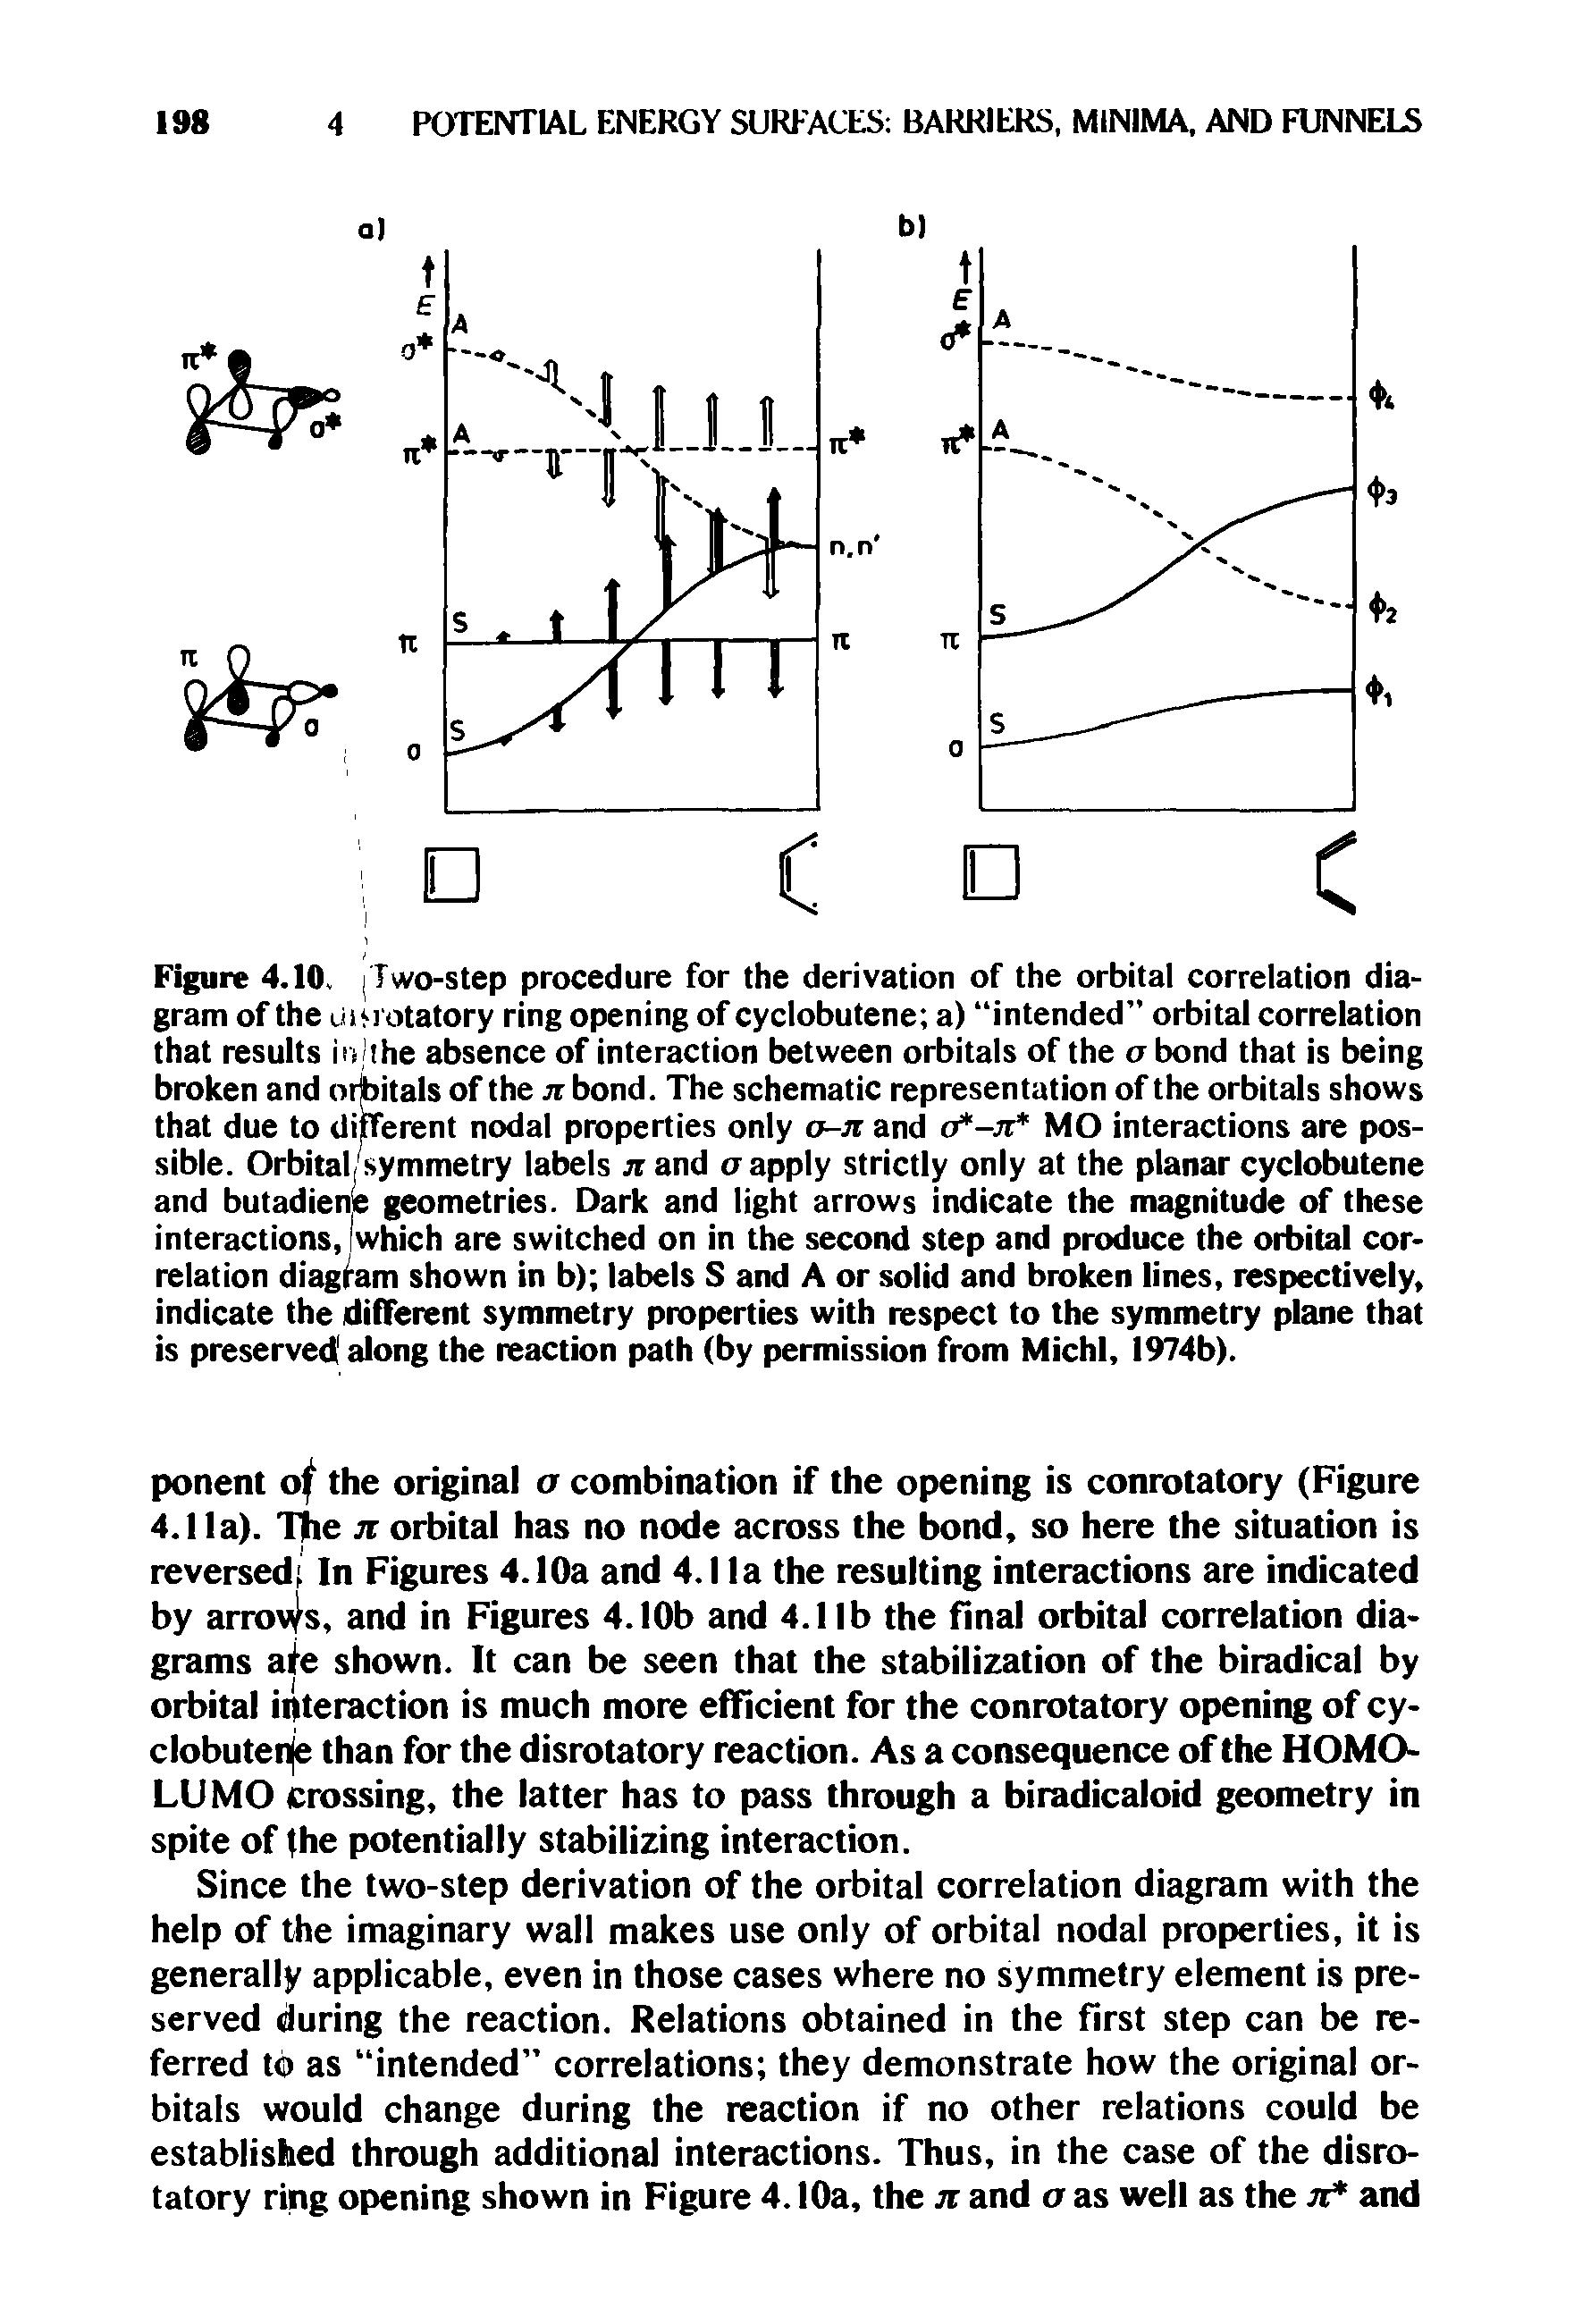 Figure 4.10. Two-step procedure for the derivation of the orbital correlation diagram of the iii<] otatory ring opening of cyclobutene a) intended orbital correlation that results ii>lthe absence of interaction between orbitals of the a bond that is being broken and orfcitals of the ji bond. The schematic representation of the orbitals shows that due to different nodal properties only o-Ji and MO interactions are pos-...